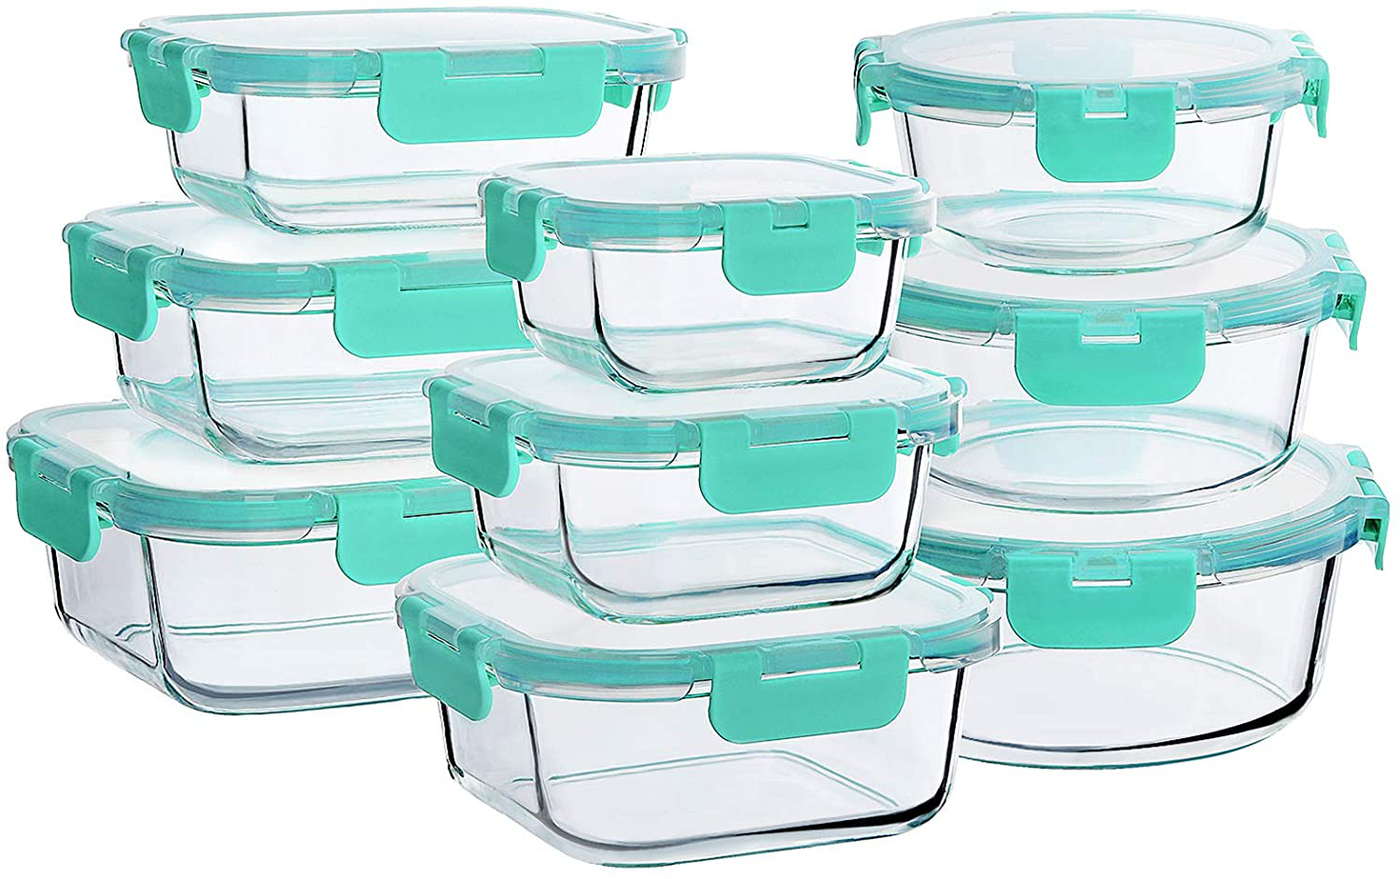 Bayco Glass Food Storage Containers with Lids, [18 Piece] Glass Meal Prep Containers, Airtight Glass Lunch Bento Boxes, BPA-Free & Leak Proof (9 lids & 9 Containers) - White